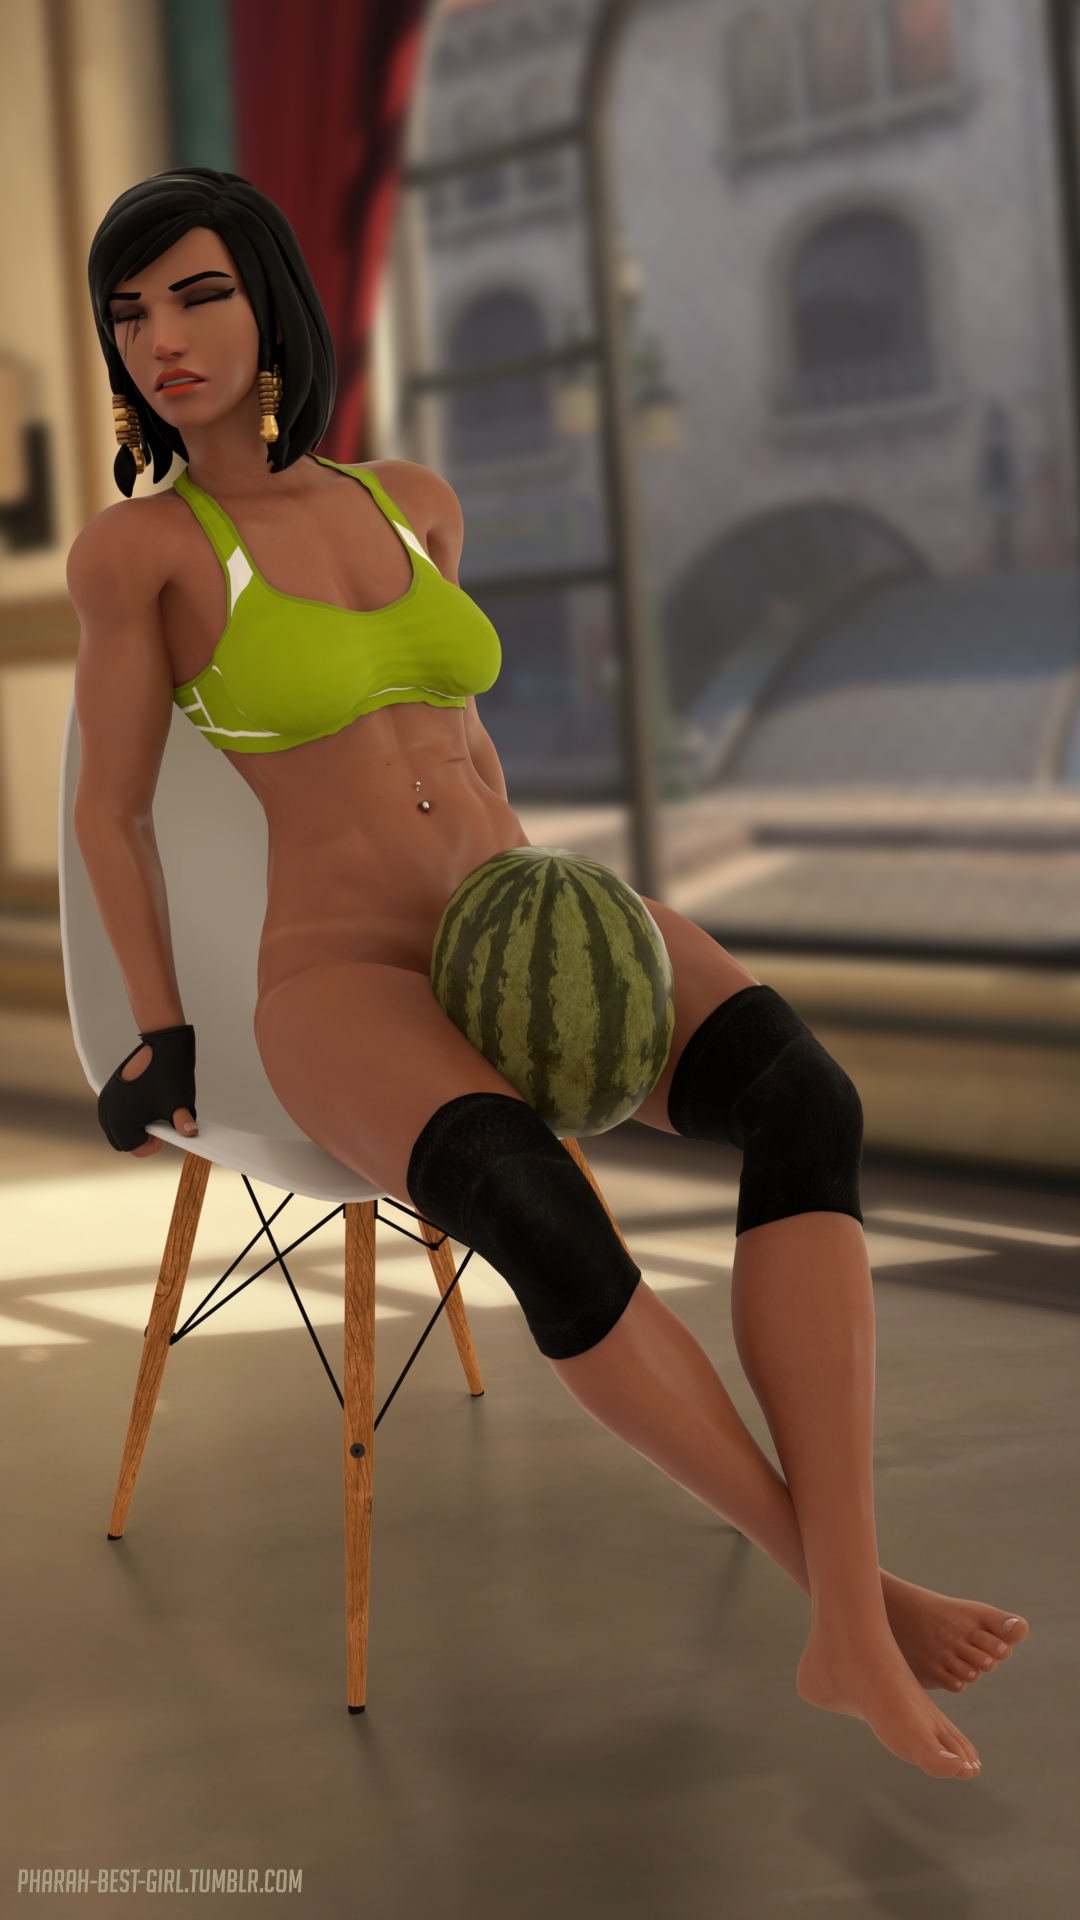 Watermelon buster Pharah Overwatch 3d Porn Sexy Nude Natural Boobs Pussy